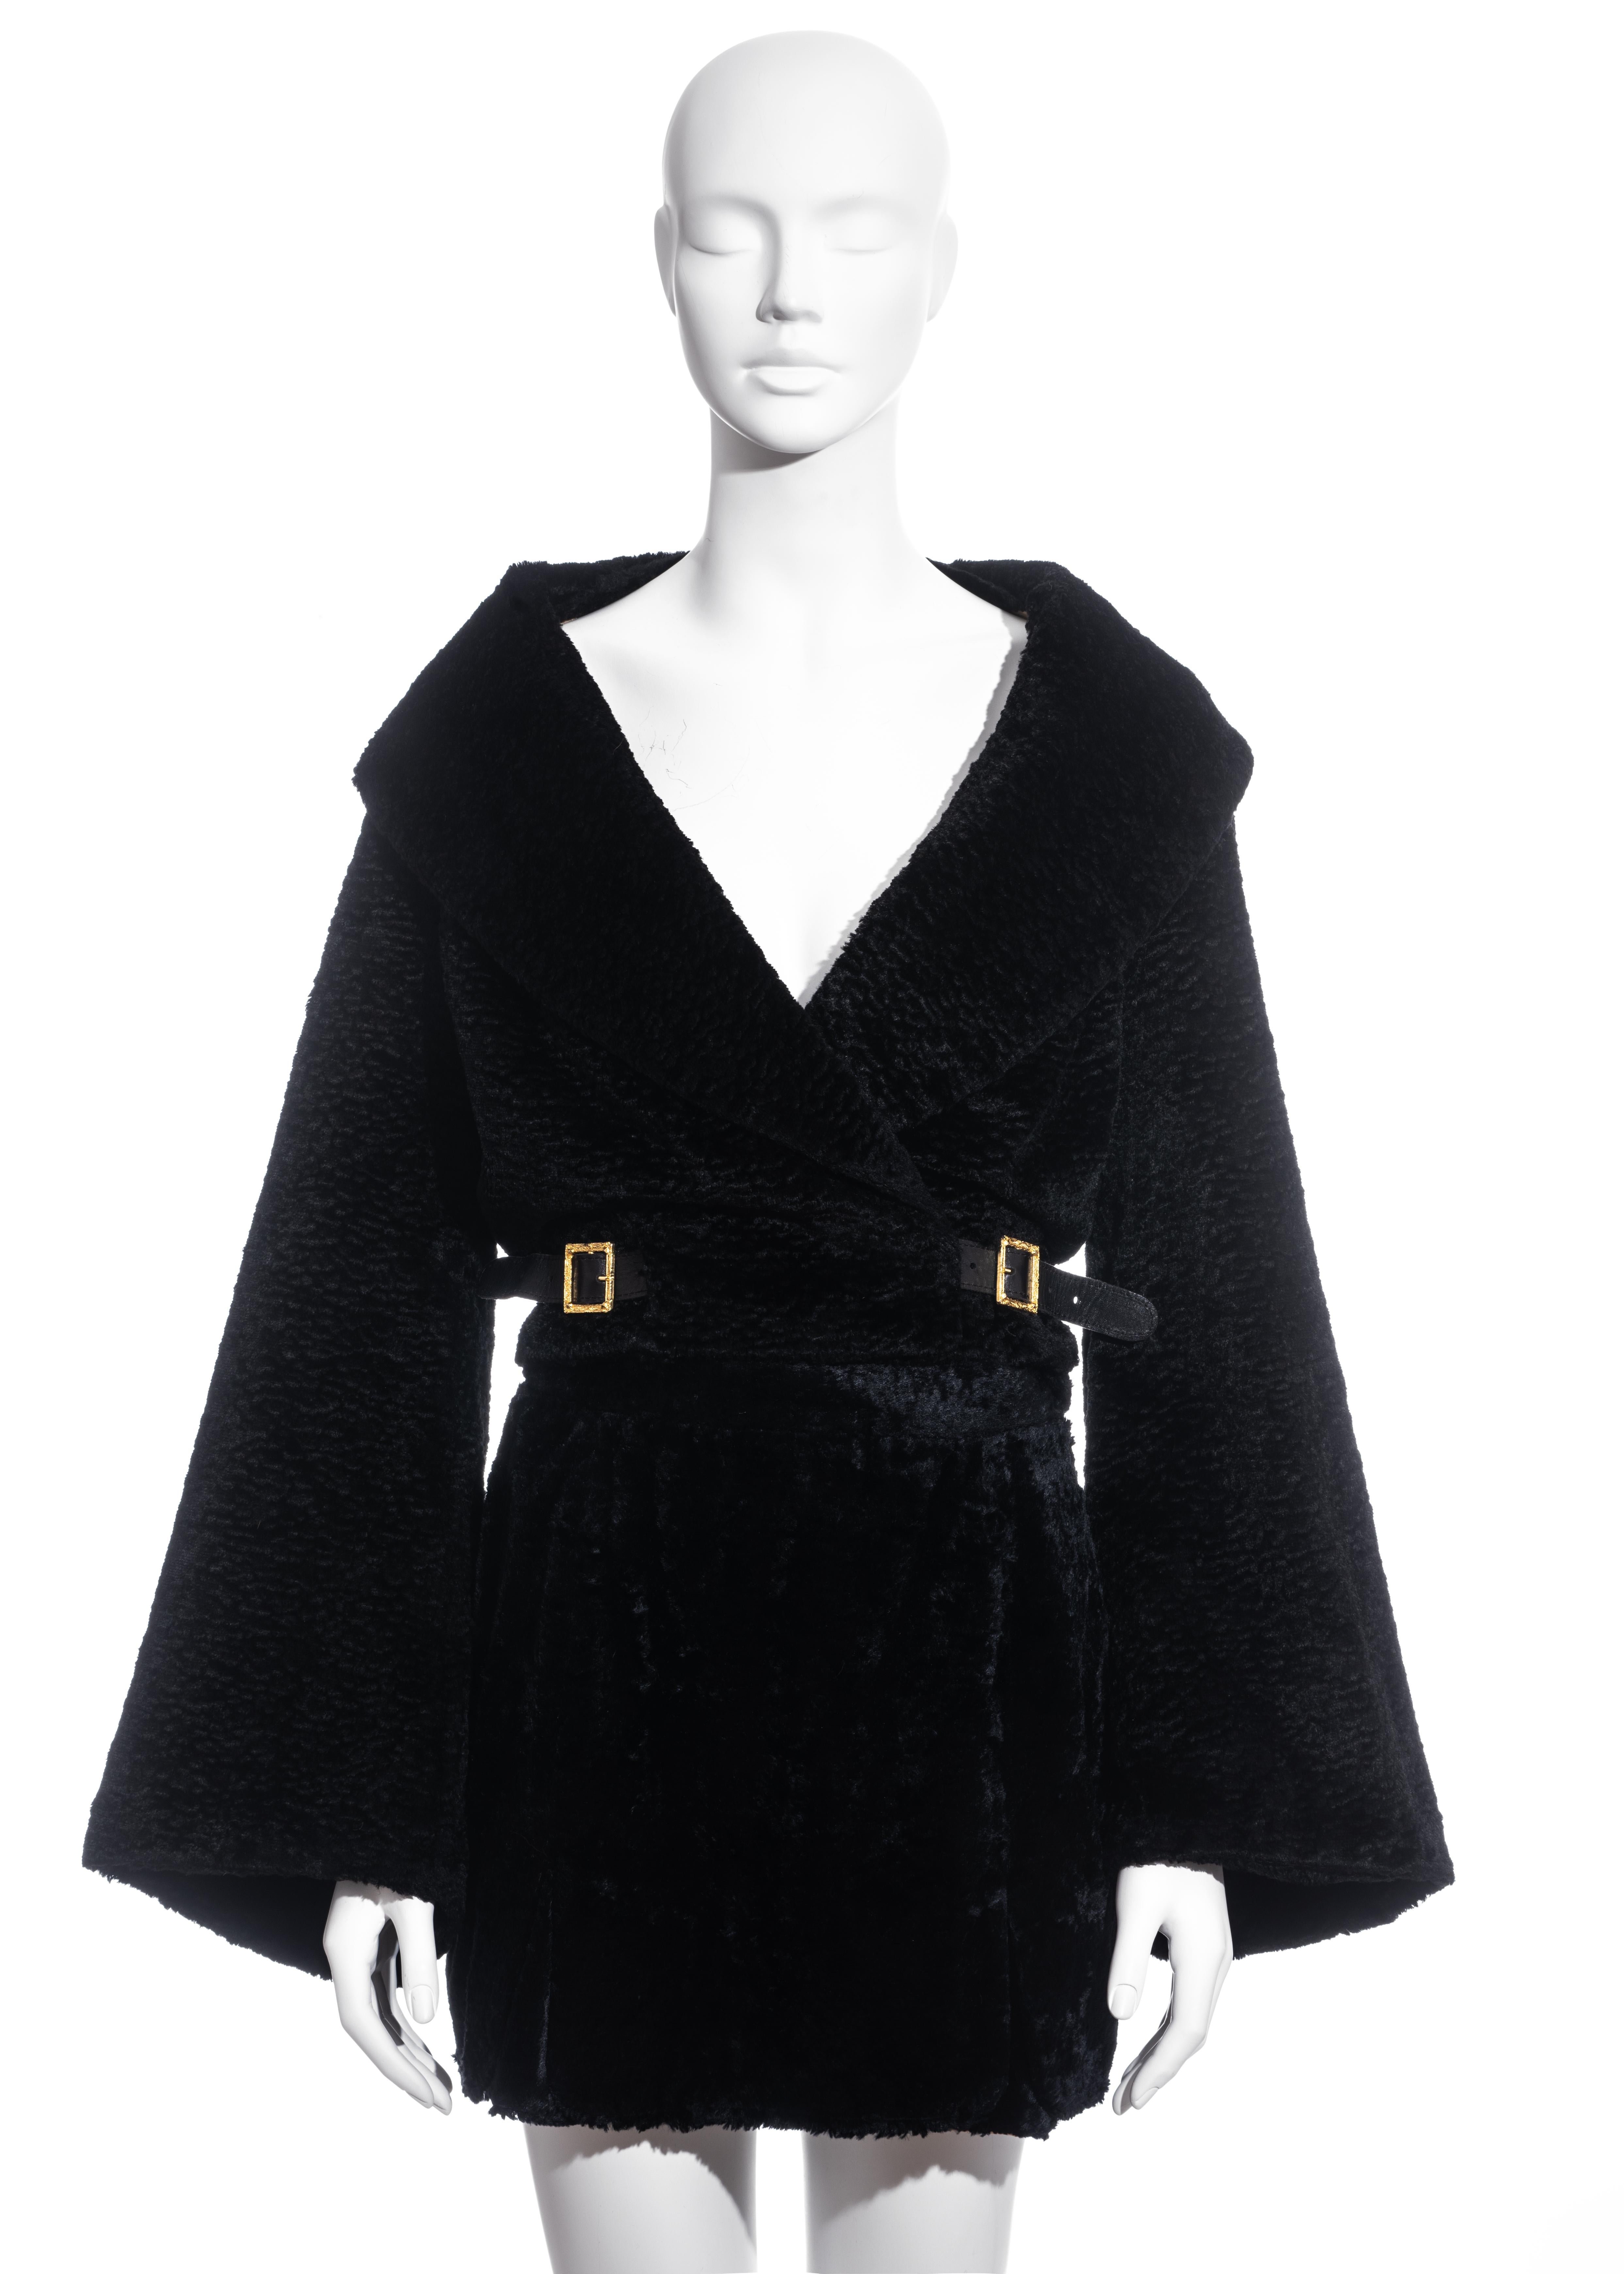 ▪ Vivienne Westwood mini skirt suit
▪ Chenille faux fur with an Astrakhan affect
▪ Wrap Jacket with bell sleeves 
▪ Gold Baroque-style square buckles with leather straps 
▪ Matching mini skirt 
▪ IT 42 - FR 38 - UK 10 - US 6
▪ Fall-Winter 1993 